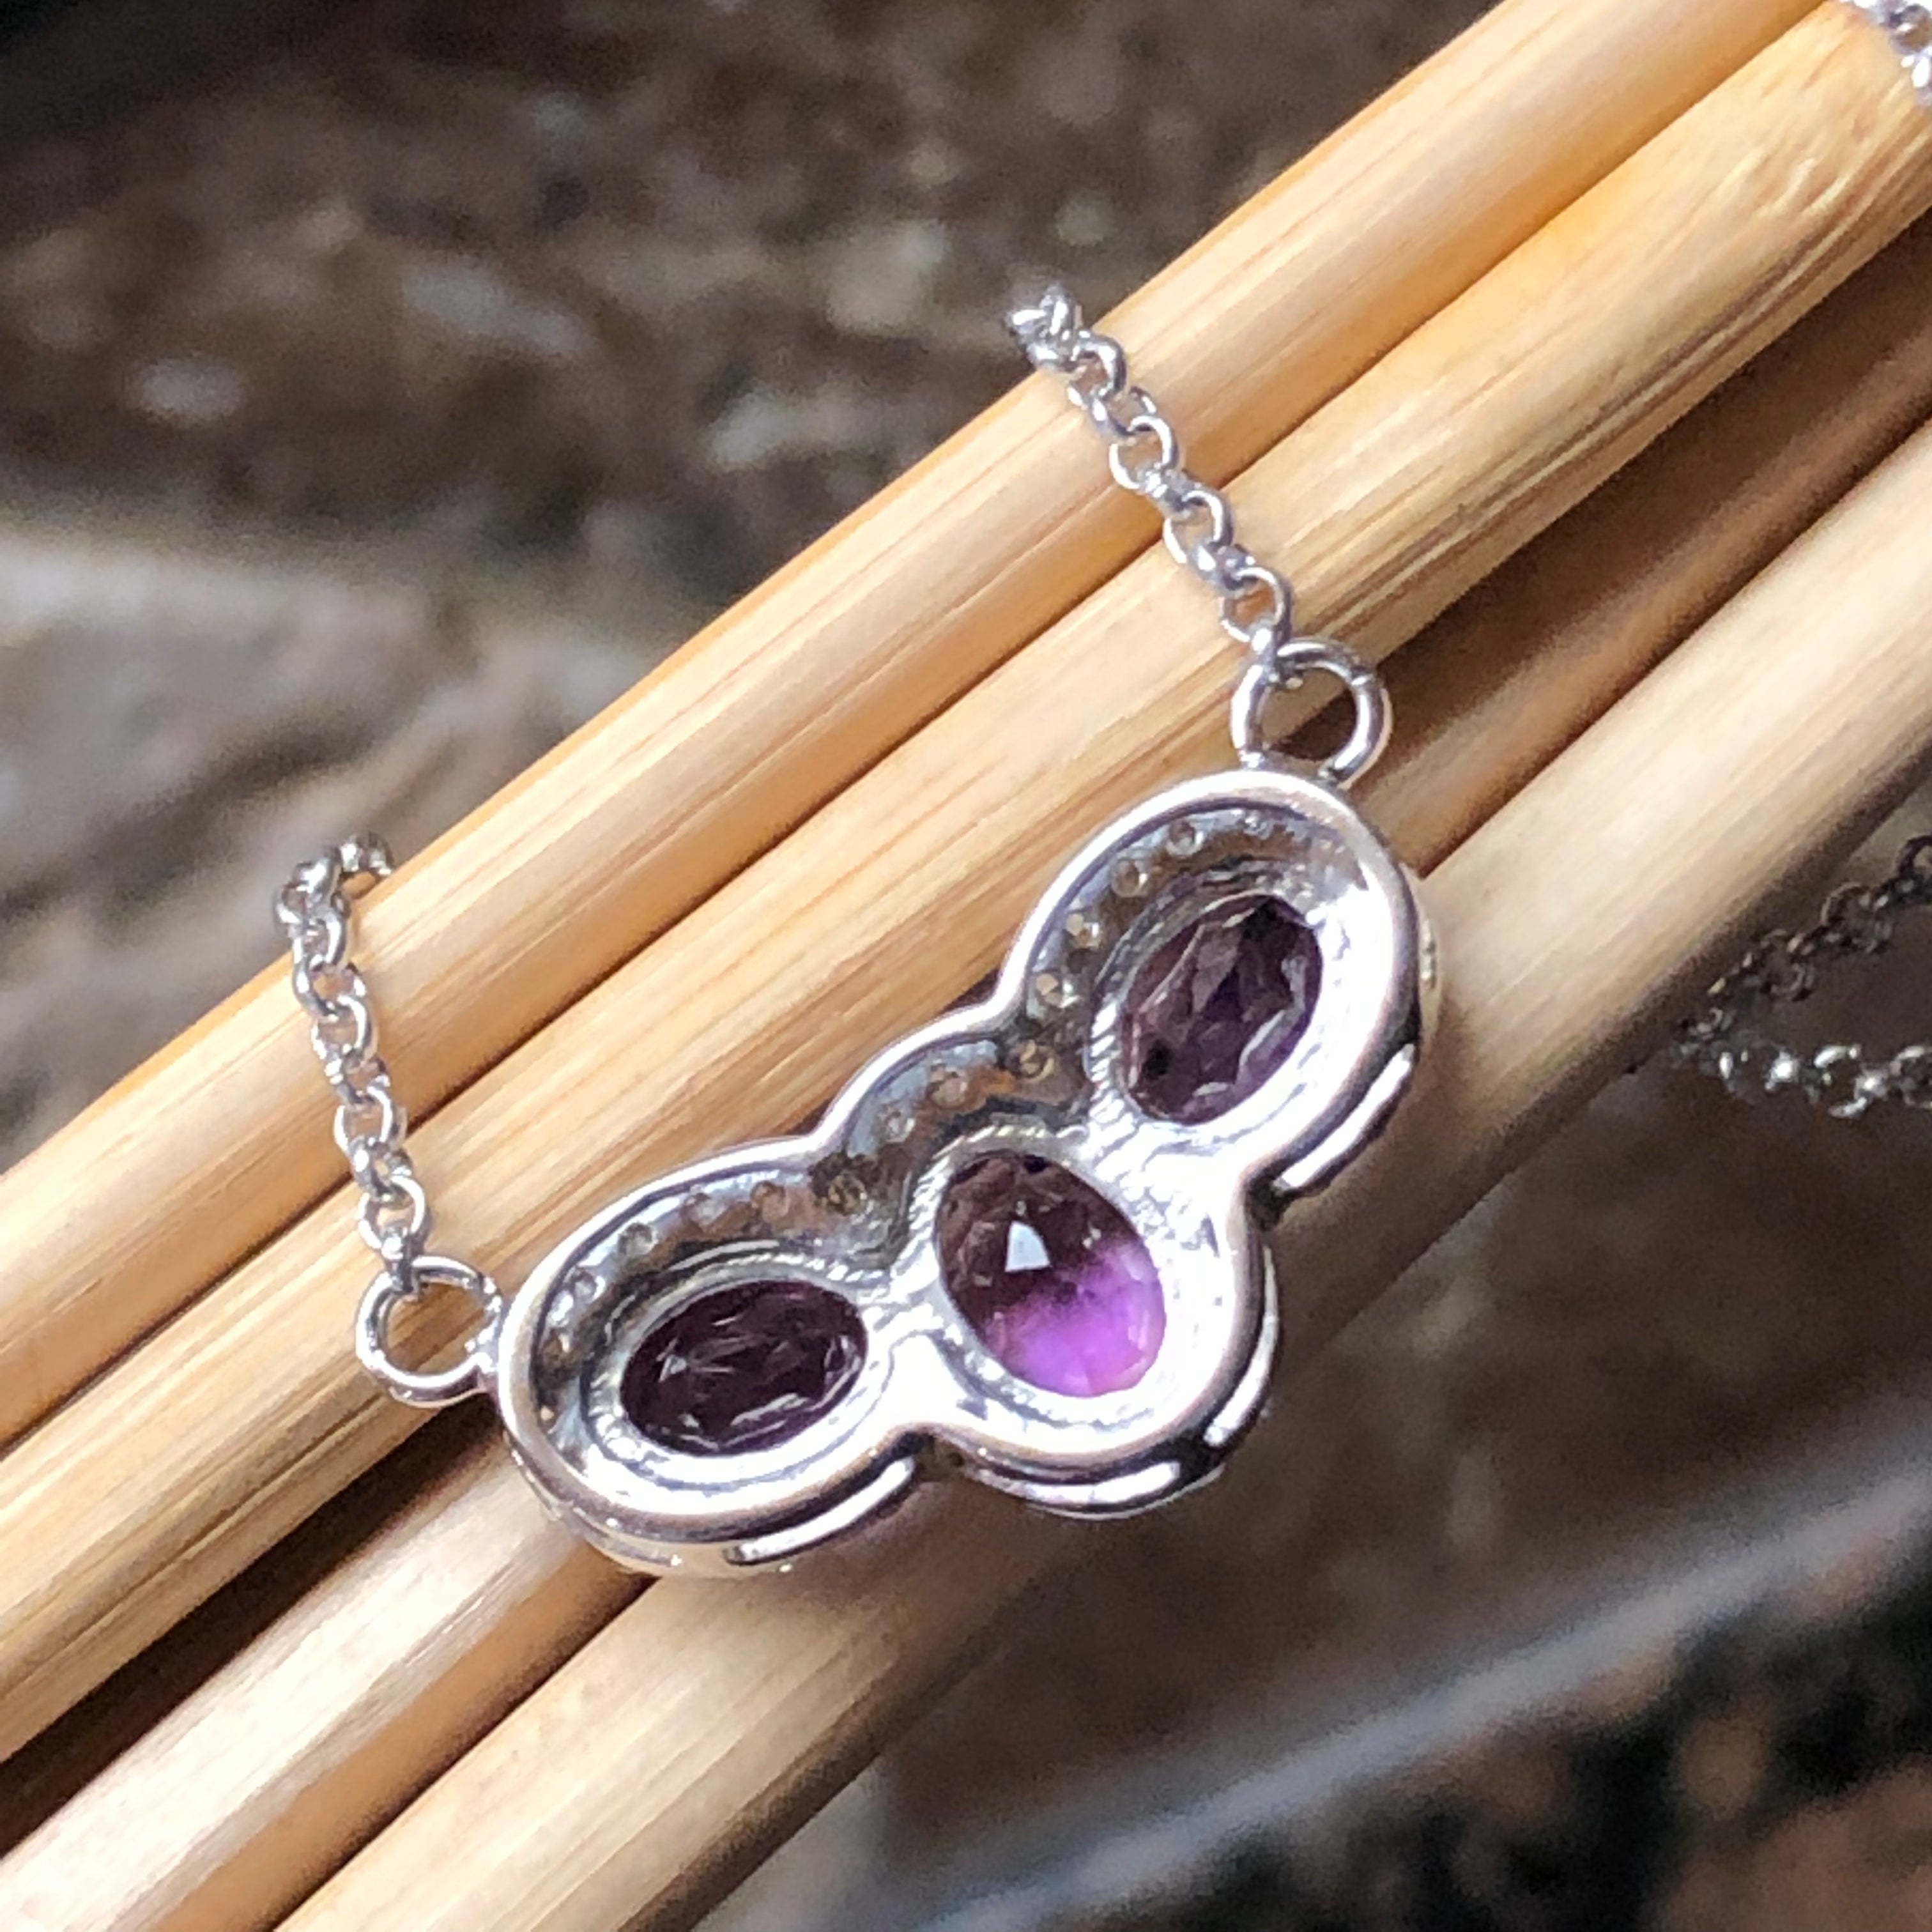 Natural 4ct Purple Amethyst, White Sapphire 925 Solid Sterling Silver Pendant Necklace 16" - Natural Rocks by Kala